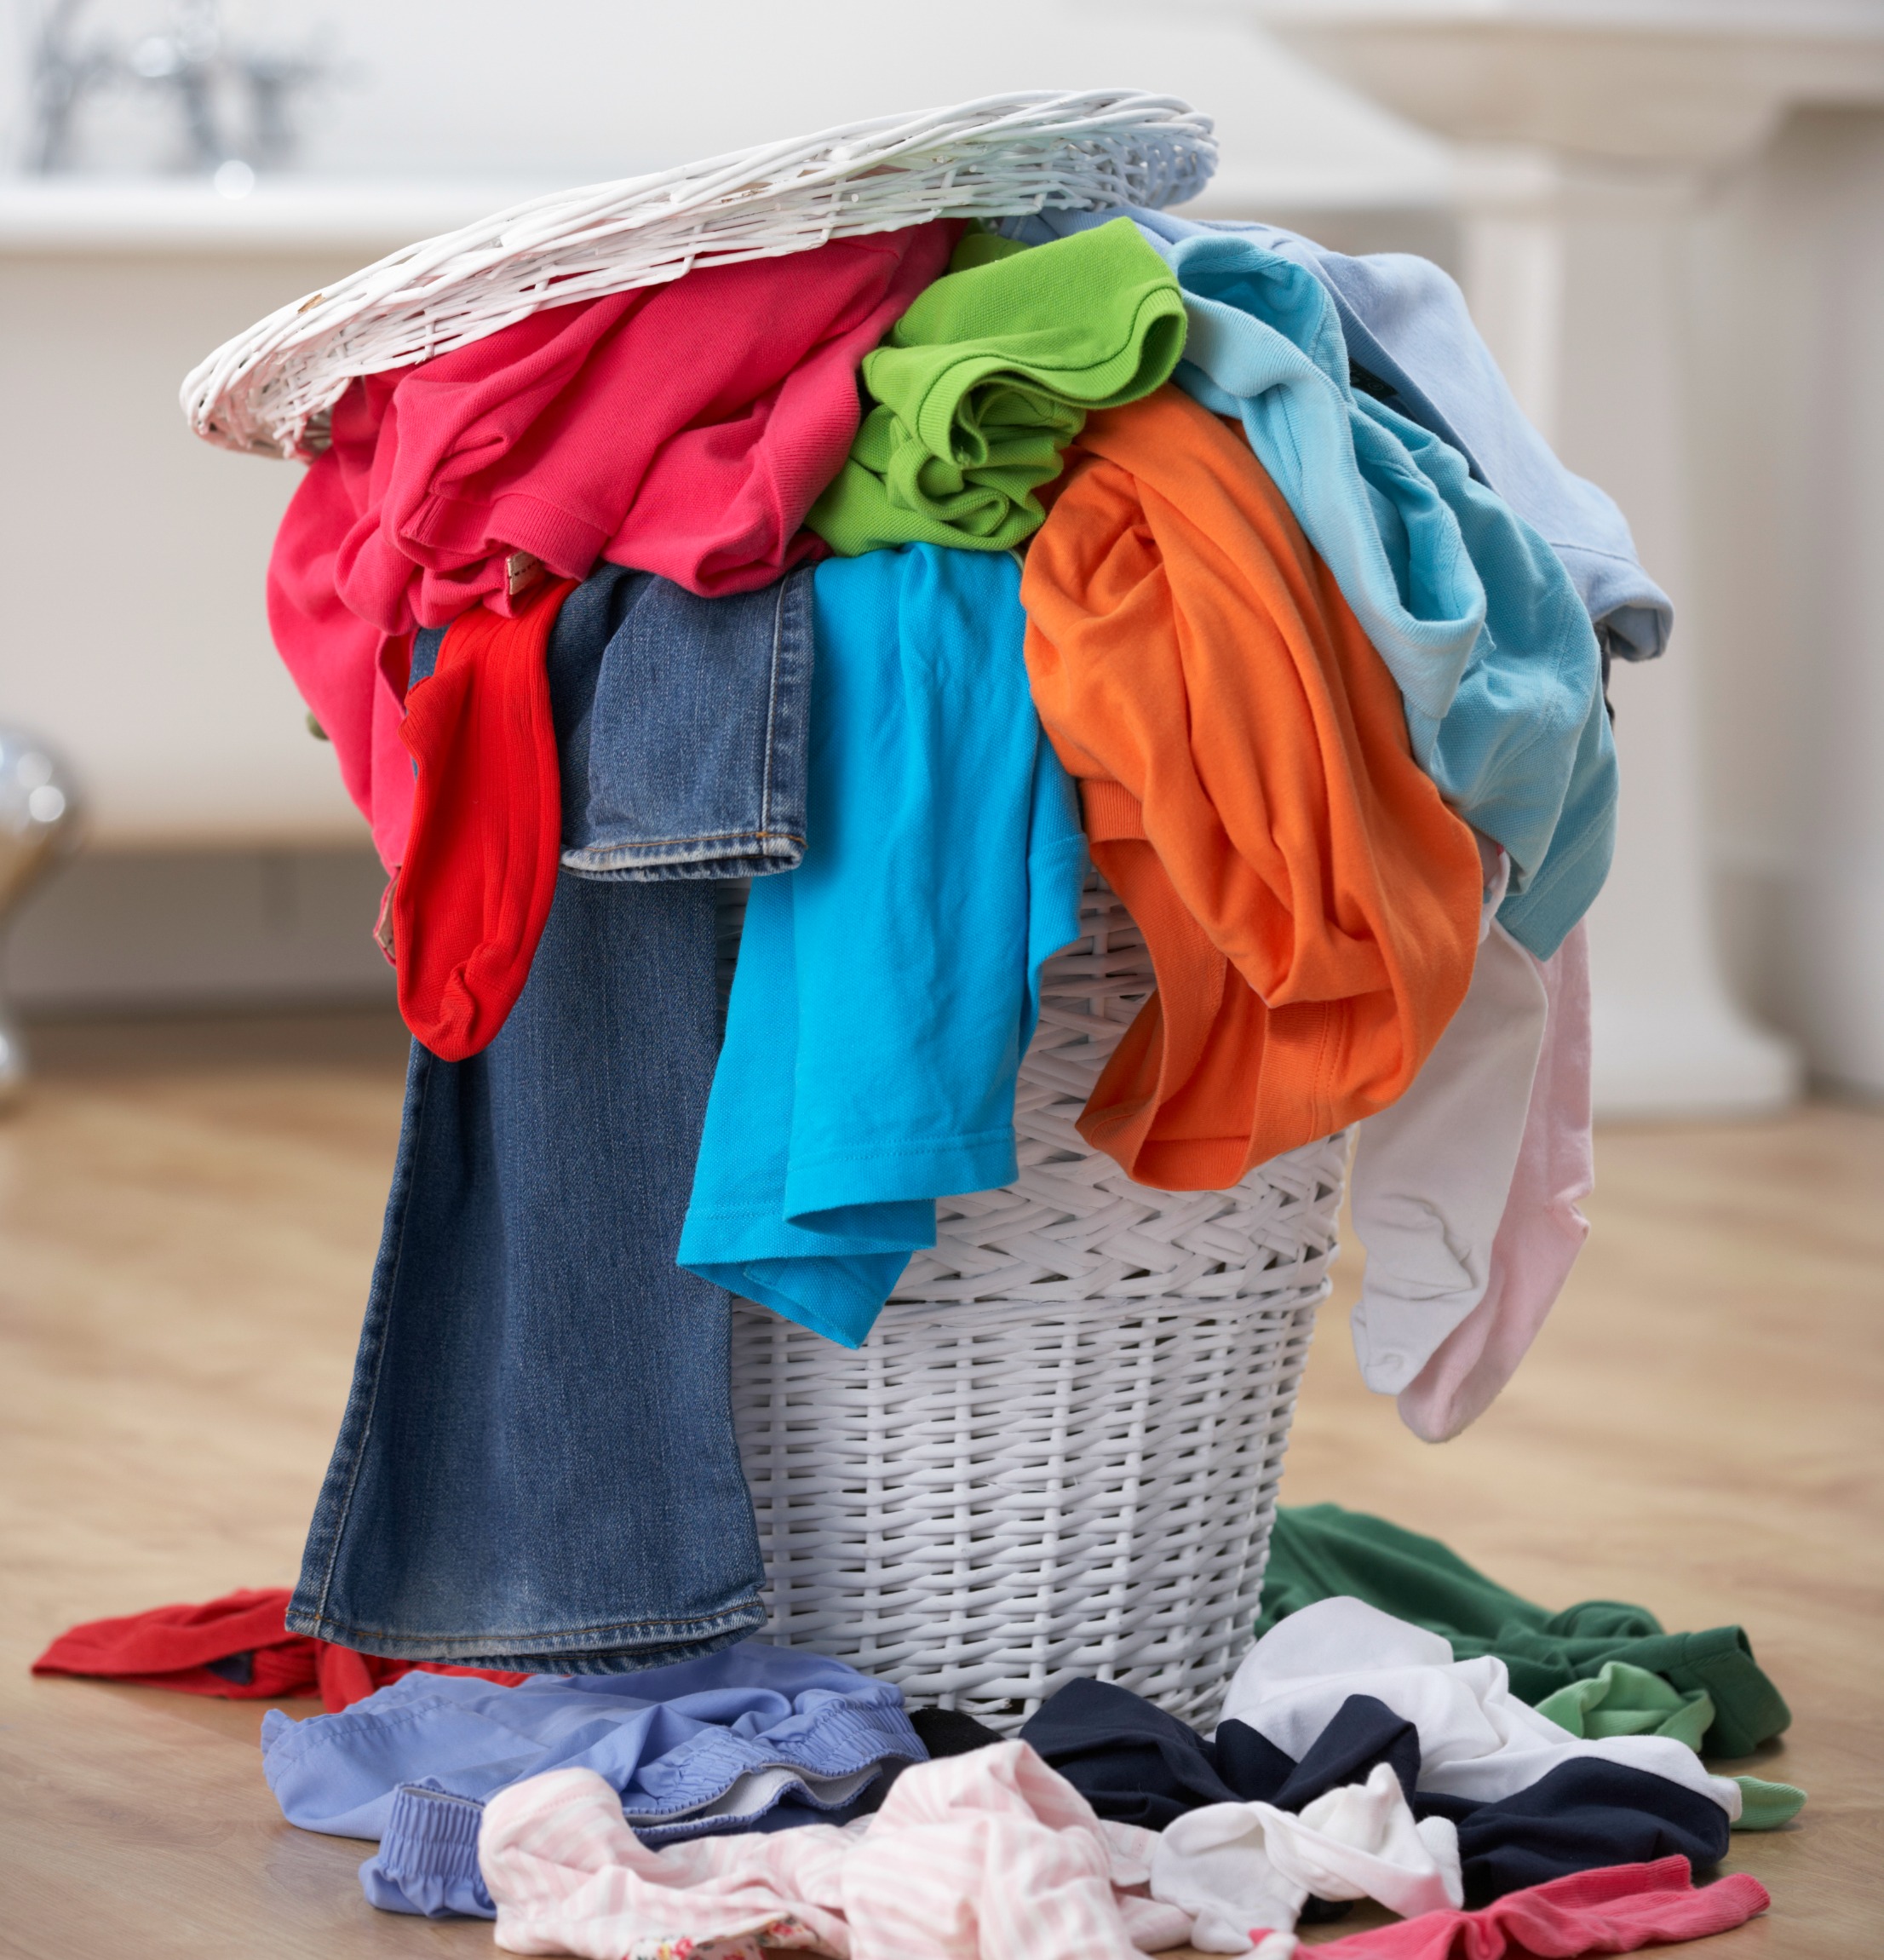 FREE Laundry Cheat Sheet! (Perfect for teaching kids how to do laundry!!)